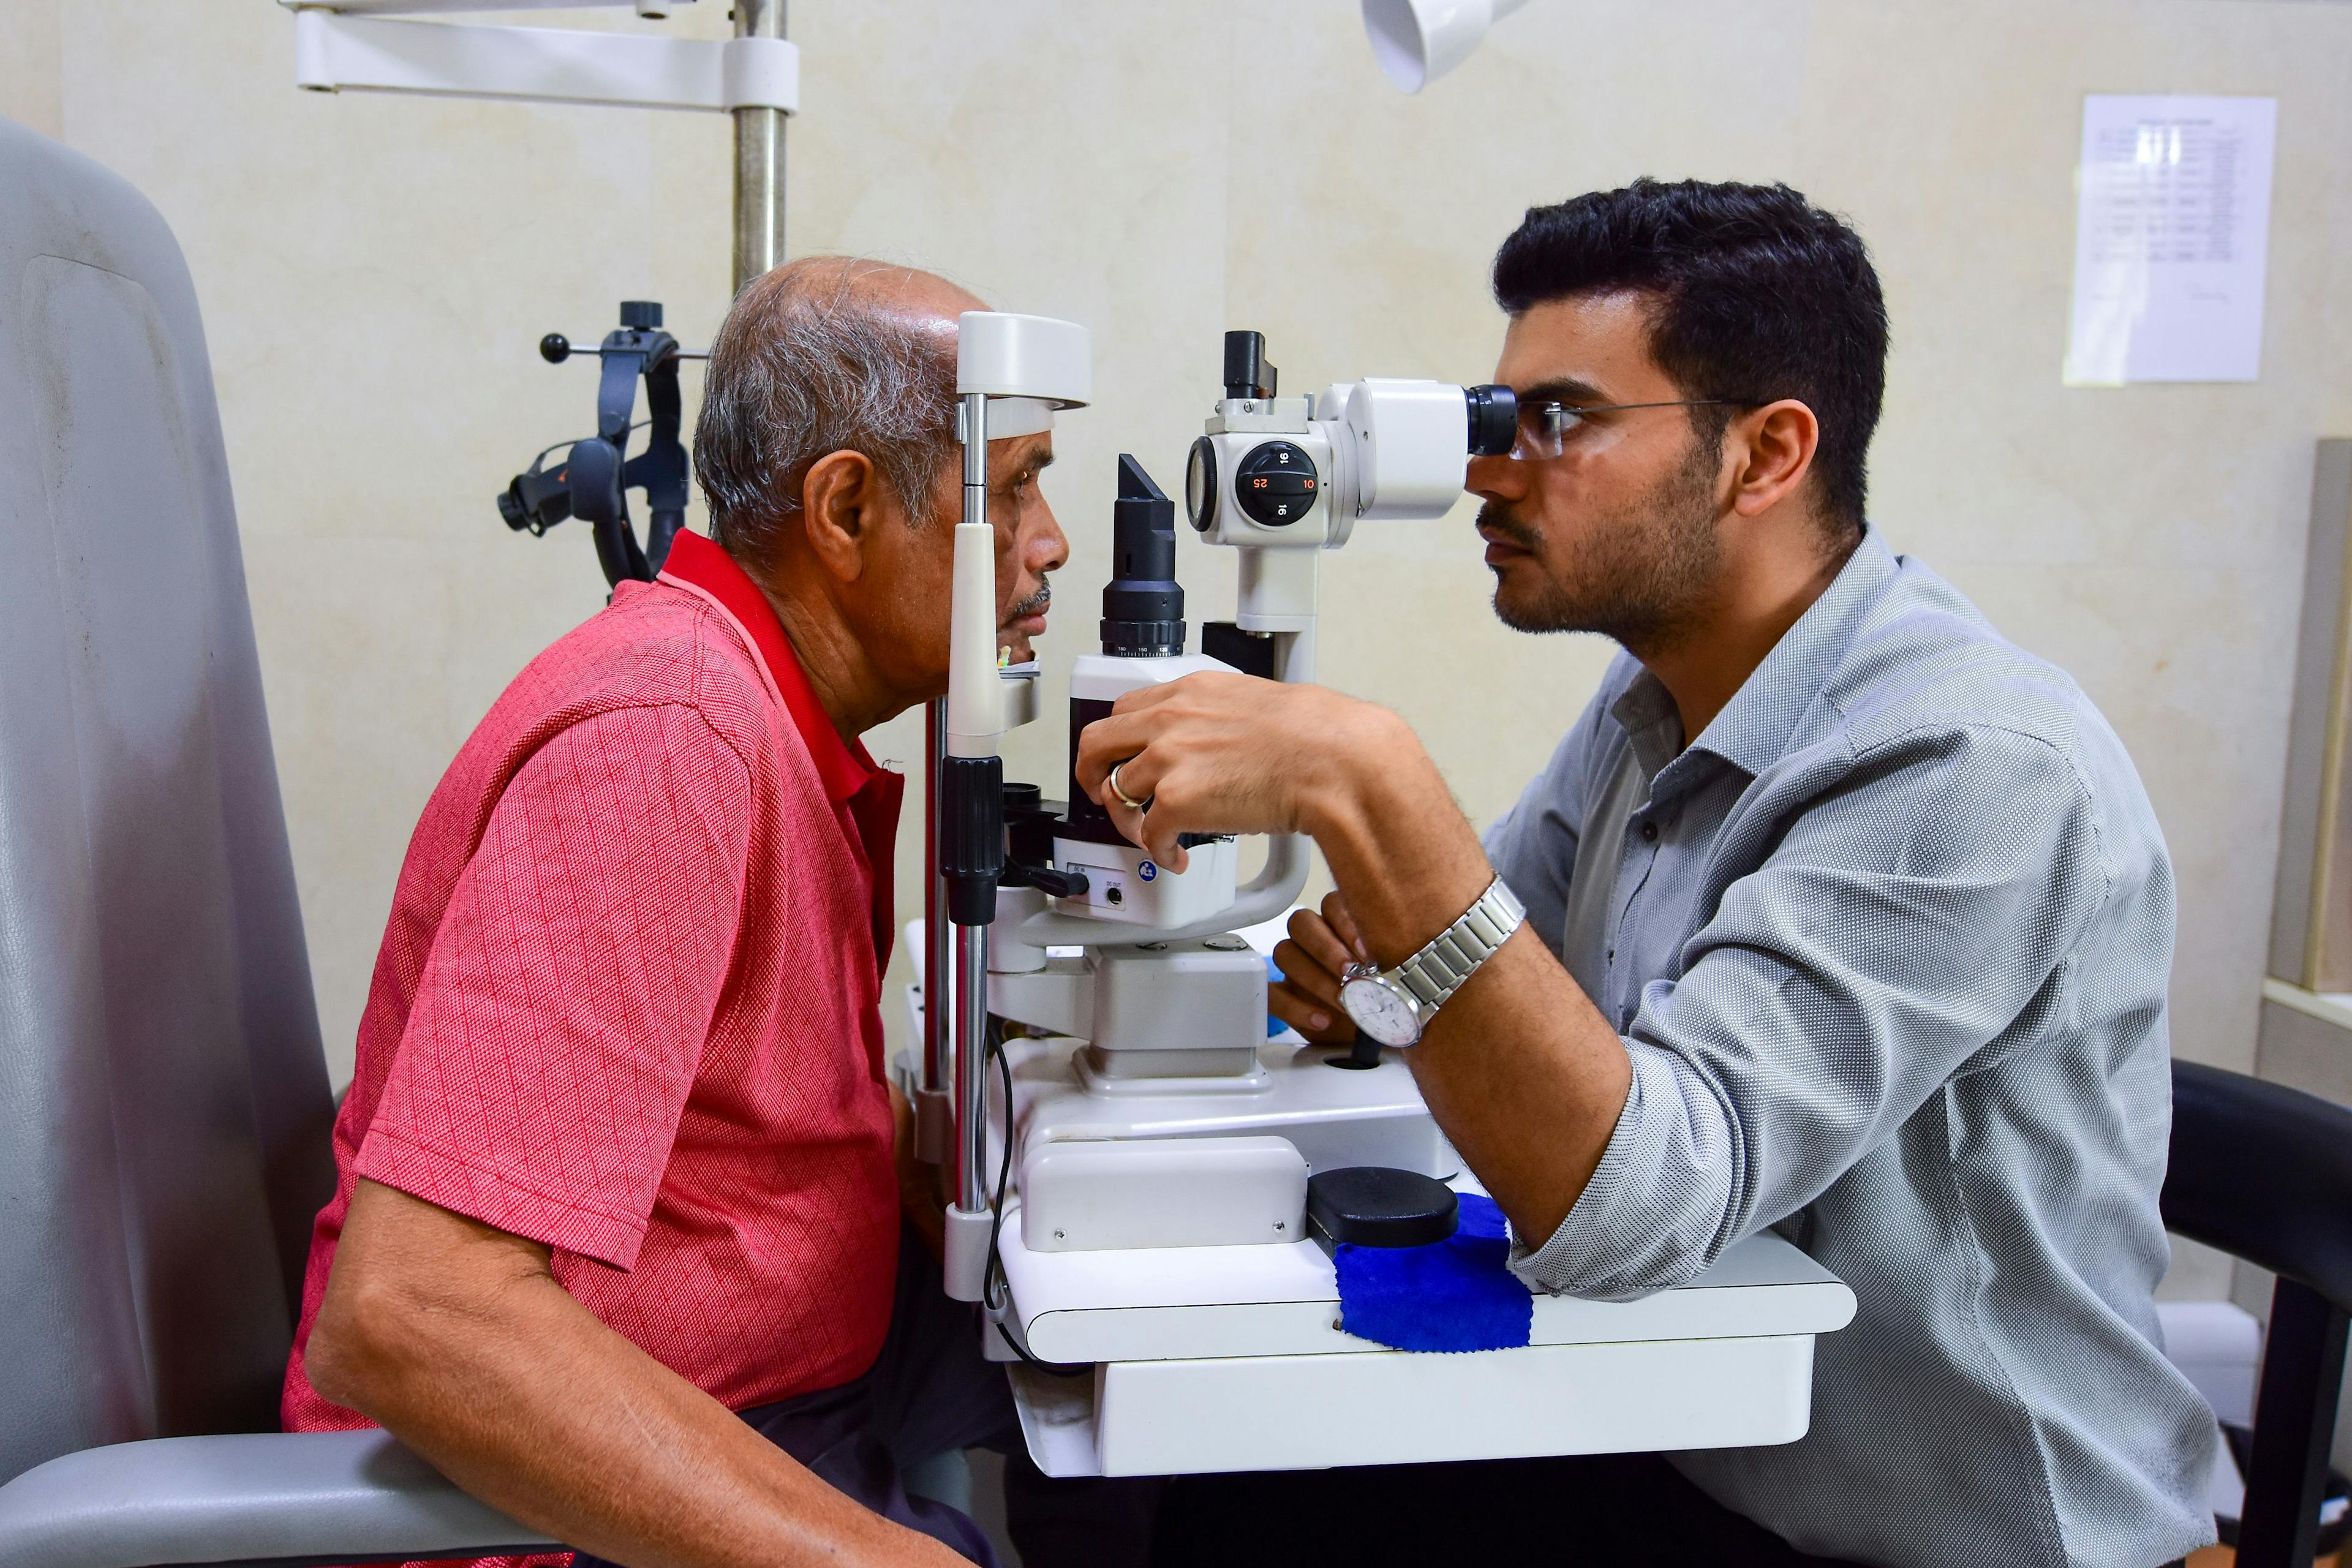 Pilot project aims to overcome inequalities in glaucoma diagnoses